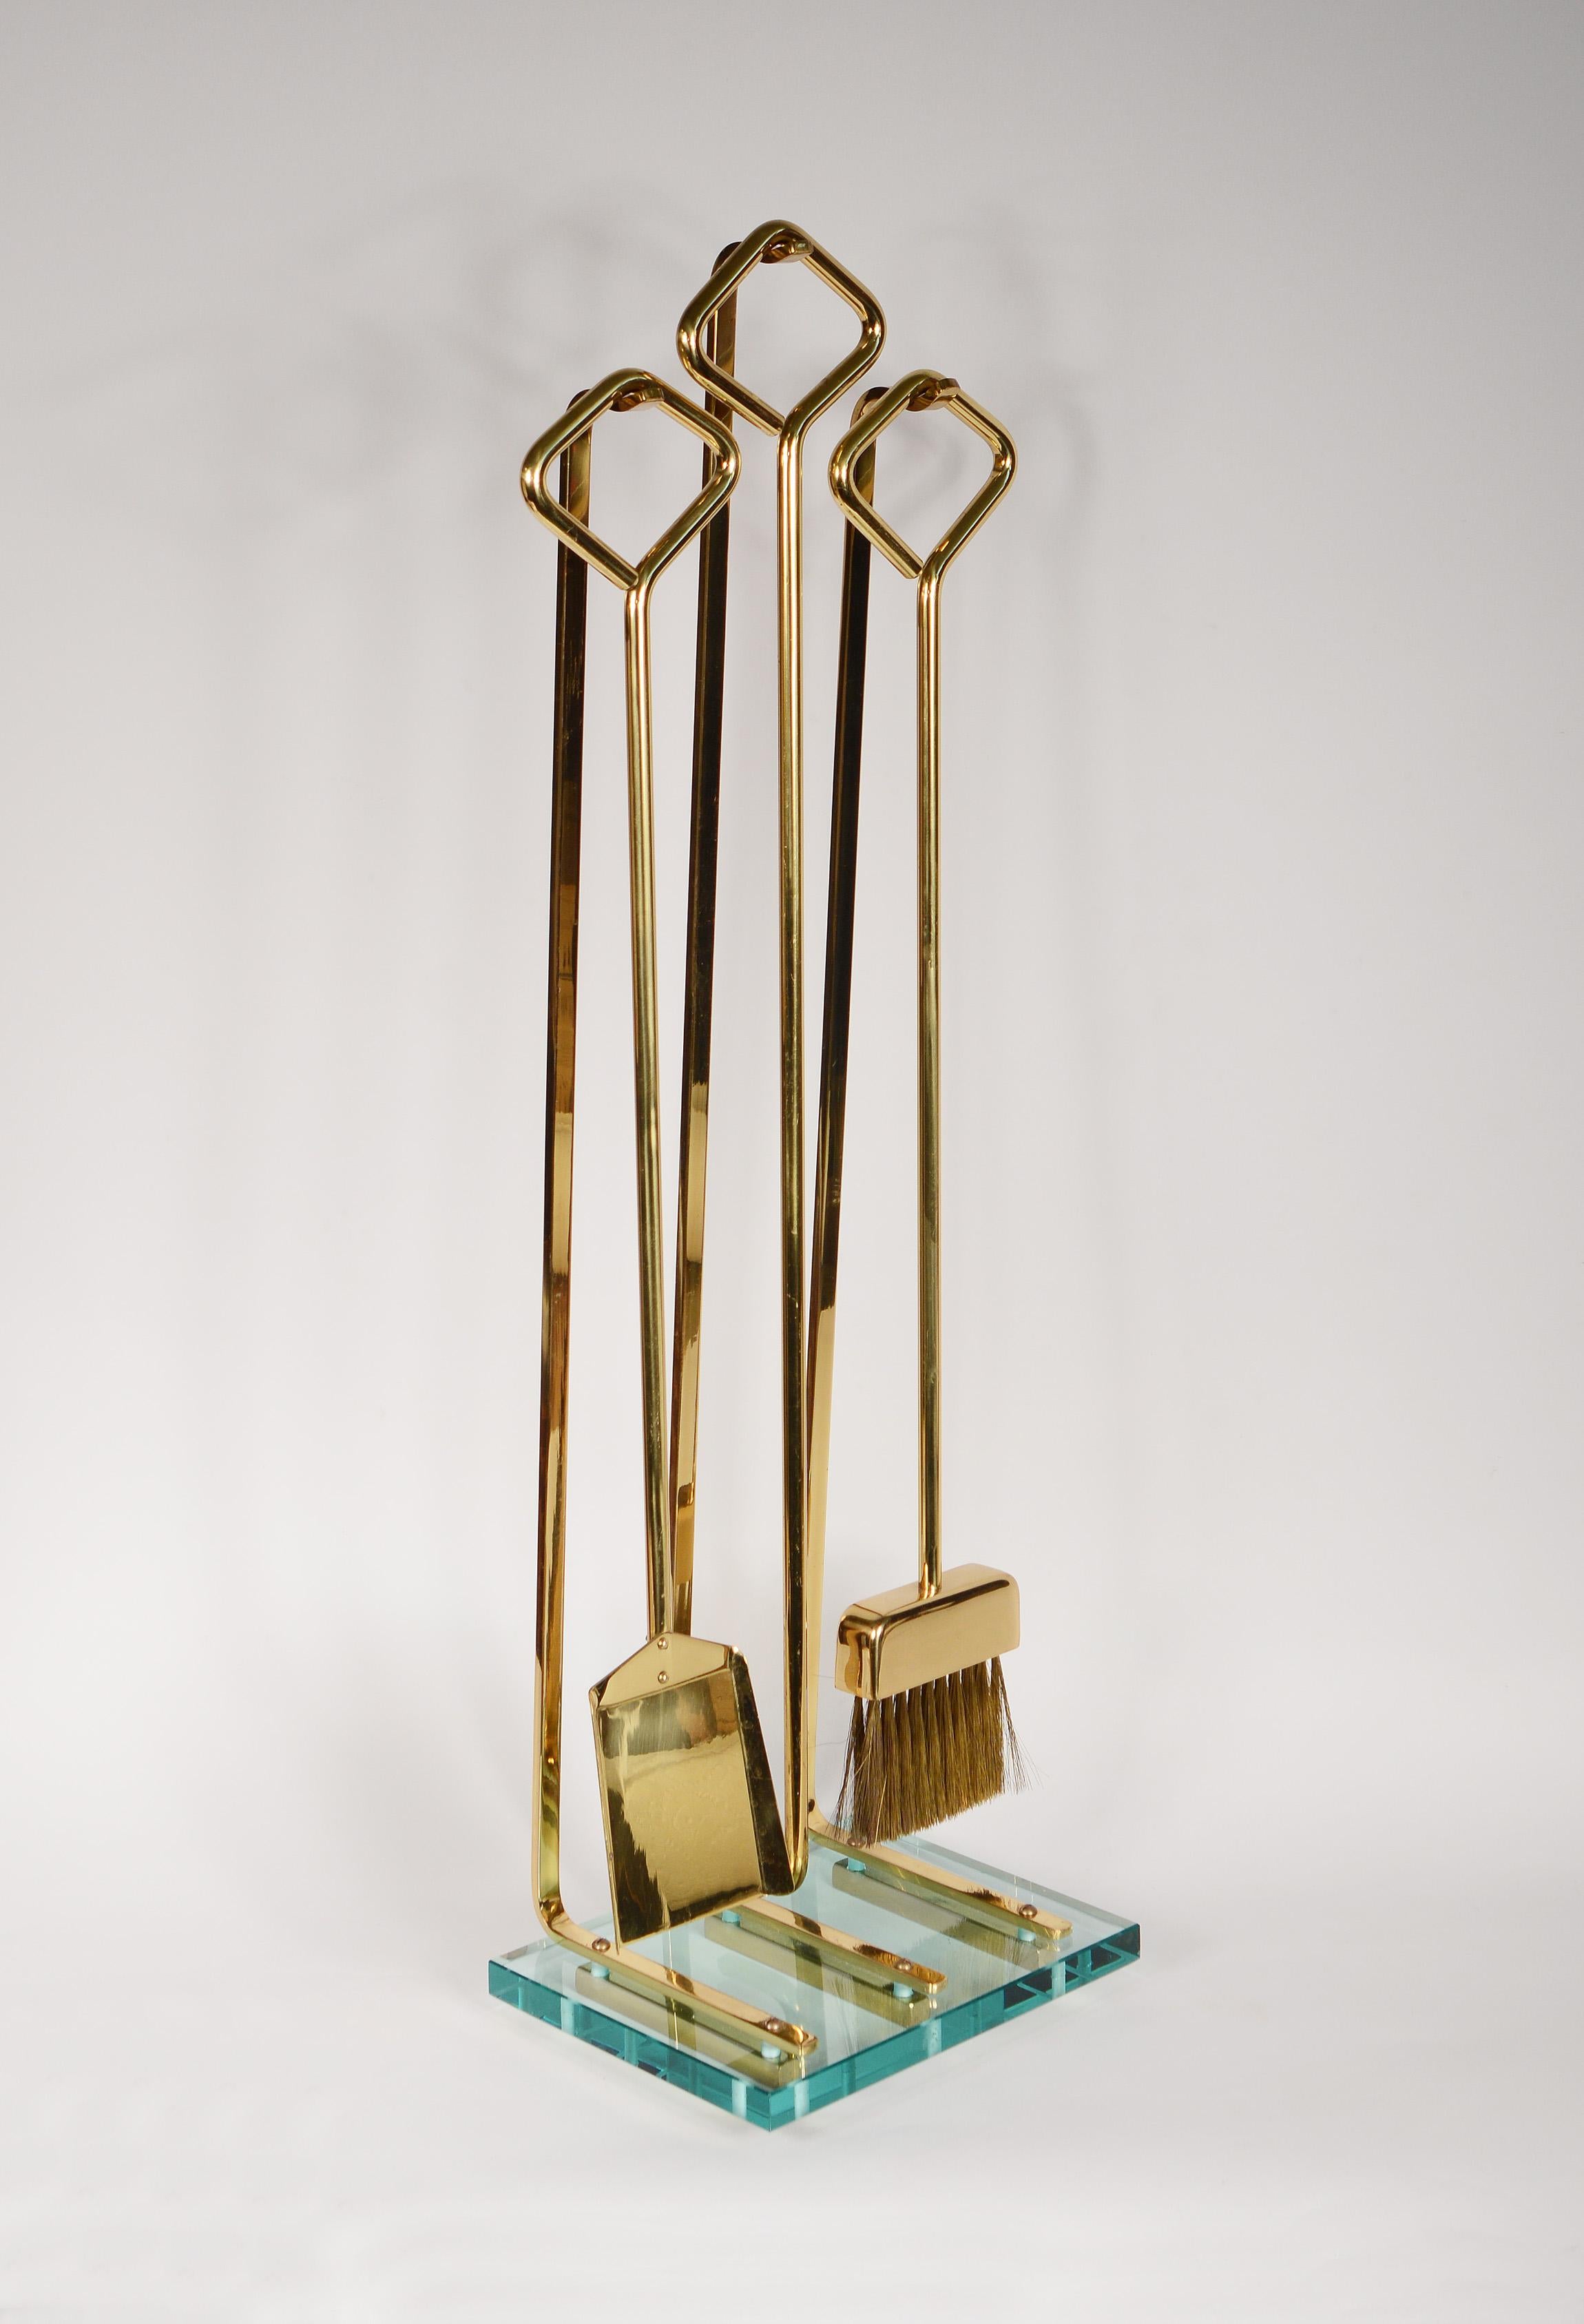 These mid century Italian fireplace tools are often attributed to Fontana Arte. While Fontana Arte is not the maker of this set the quality is on an equal level. The base is 3/4 glass with brass feet and brass rods holding the tools. This set has a